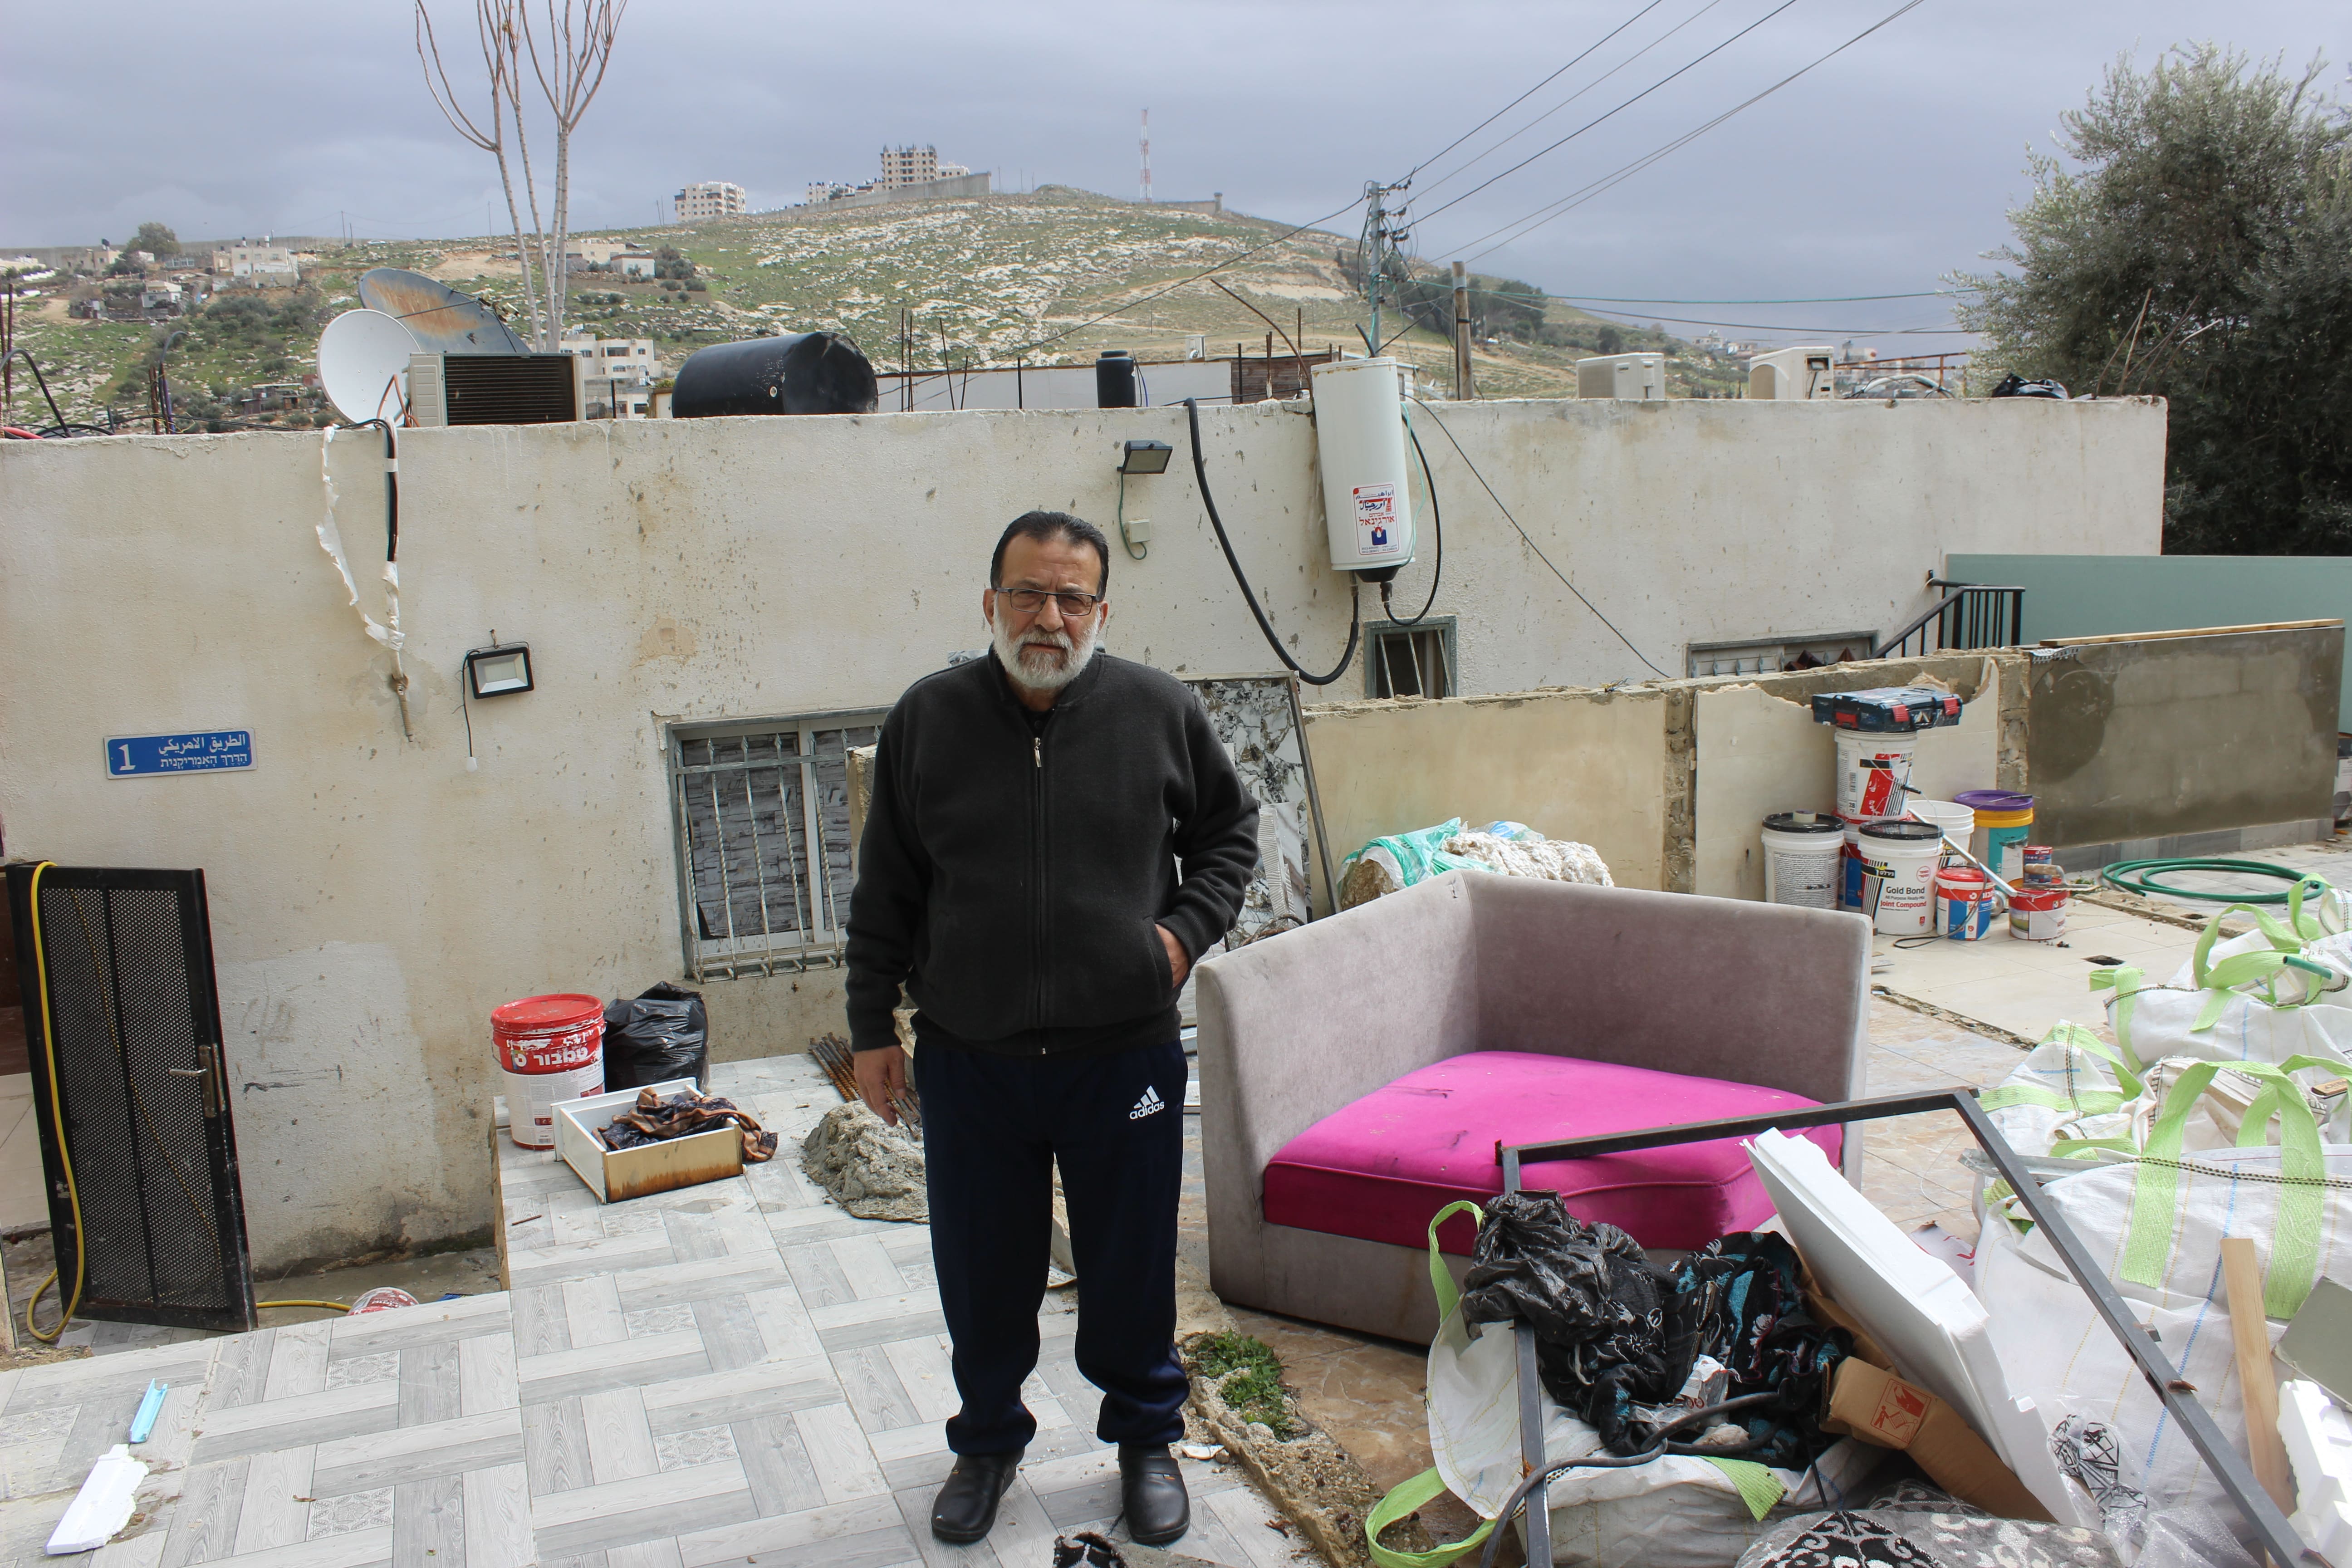 Khaled Bashir has had two of his family houses demolished by Israeli authorities over the years. (MEE/Aseel Jundi) 